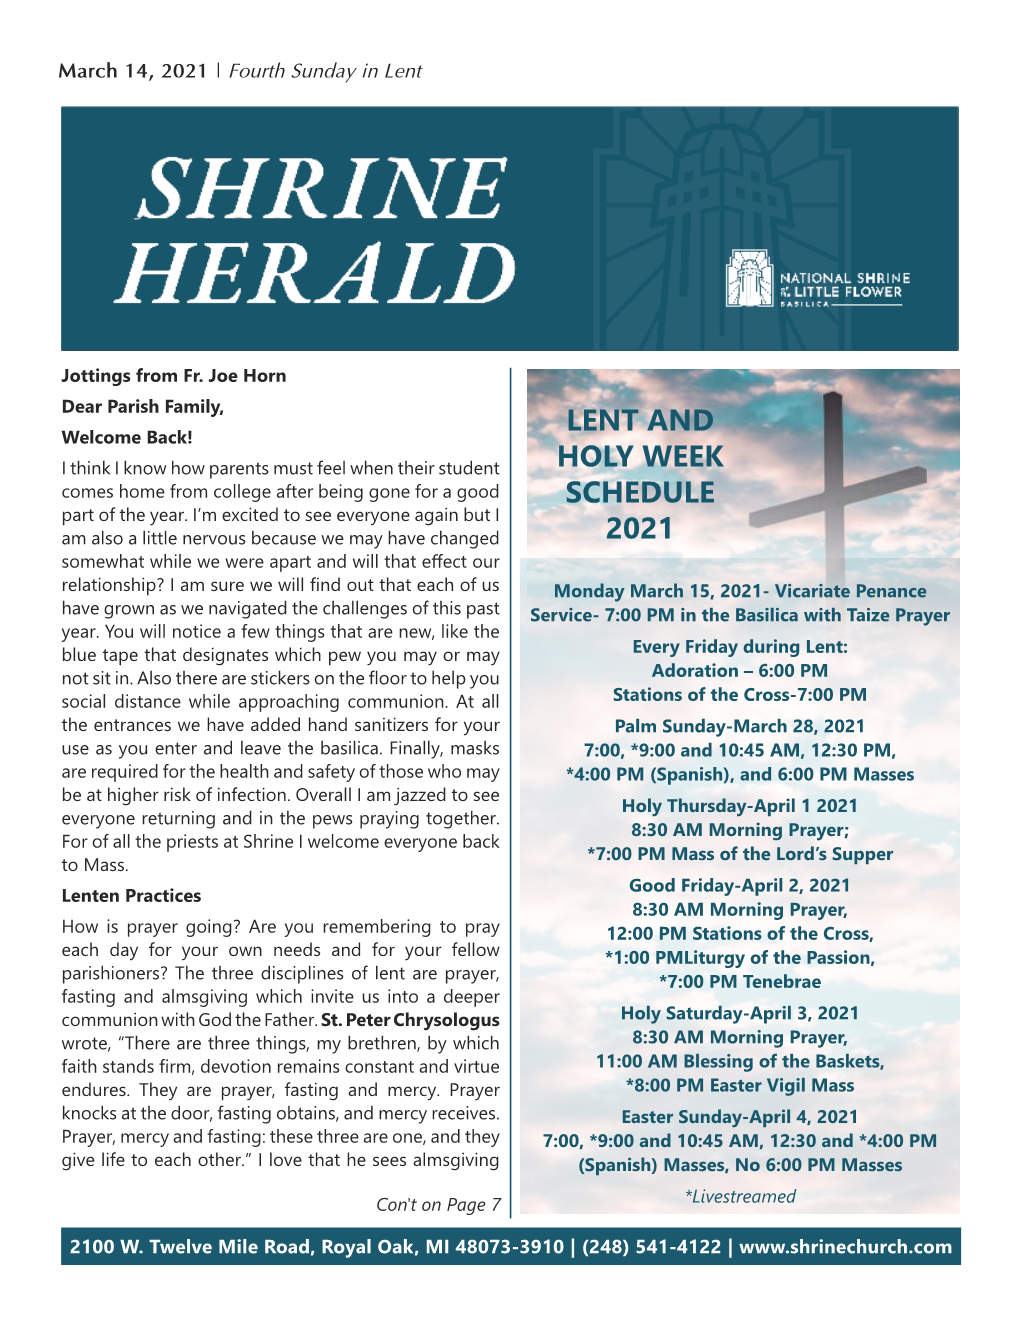 Lent and Holy Week Schedule 2021